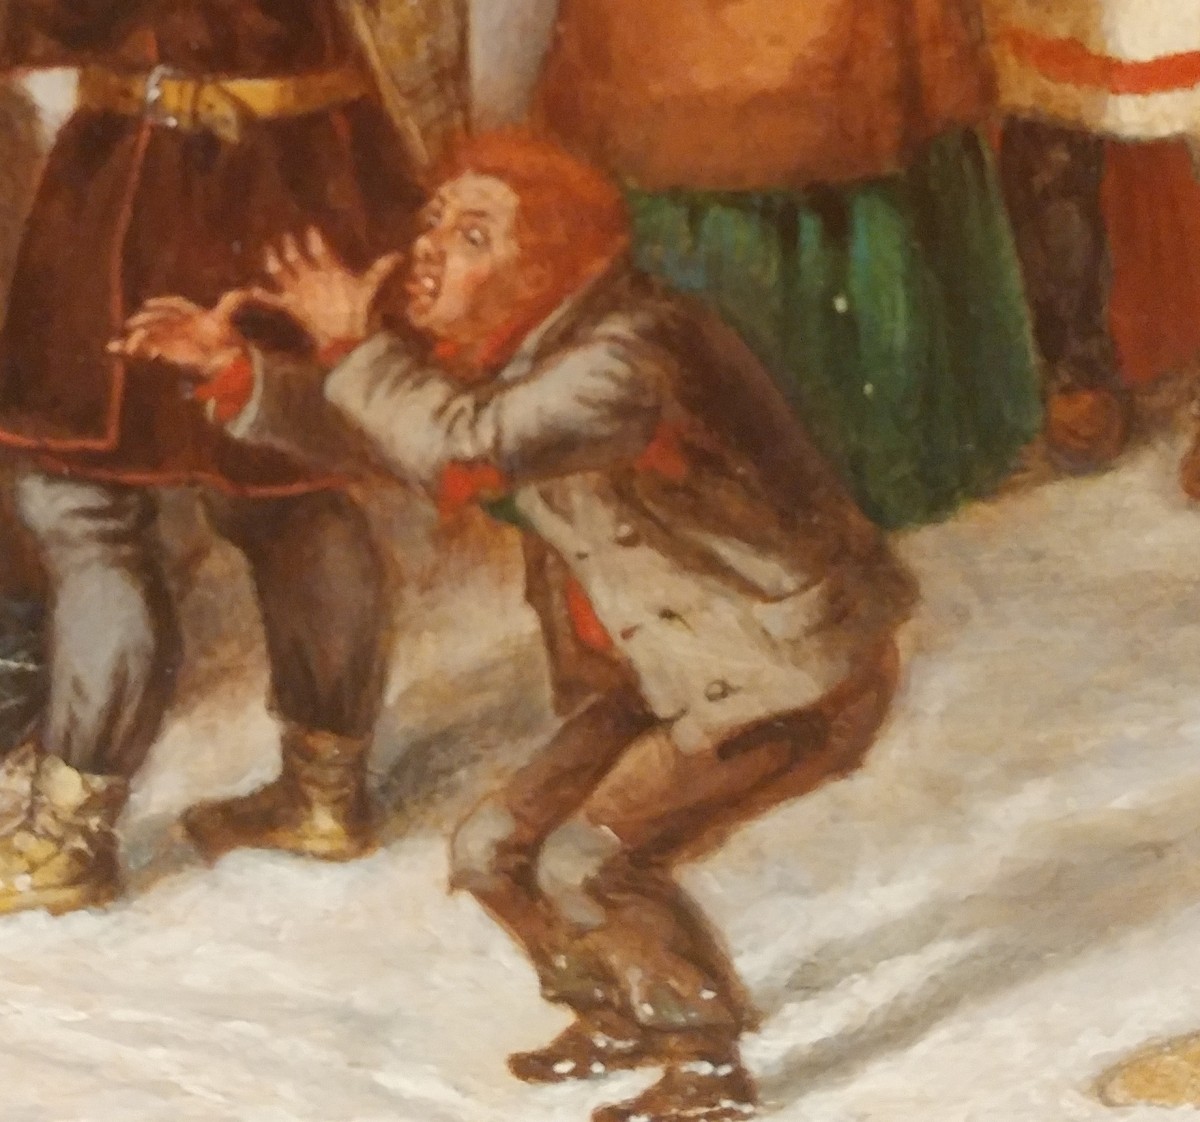 A close up of a Conrnelius Krieghoff painting featuring a man making a mocking face.